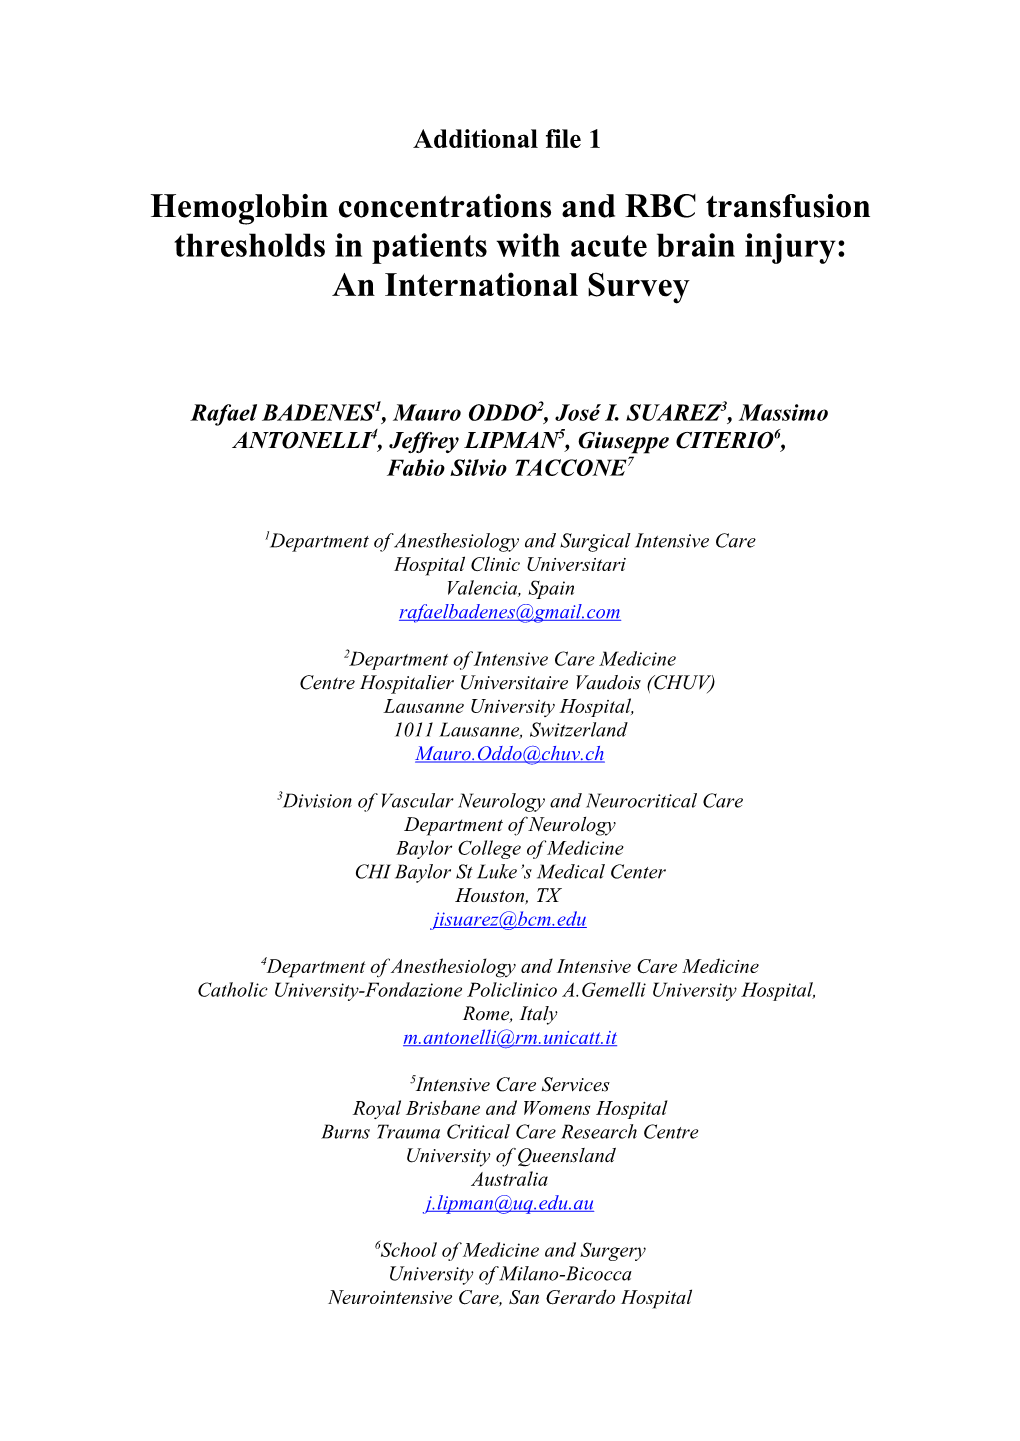 Hemoglobinconcentrations and RBC Transfusion Thresholds in Patients with Acute Brain Injury